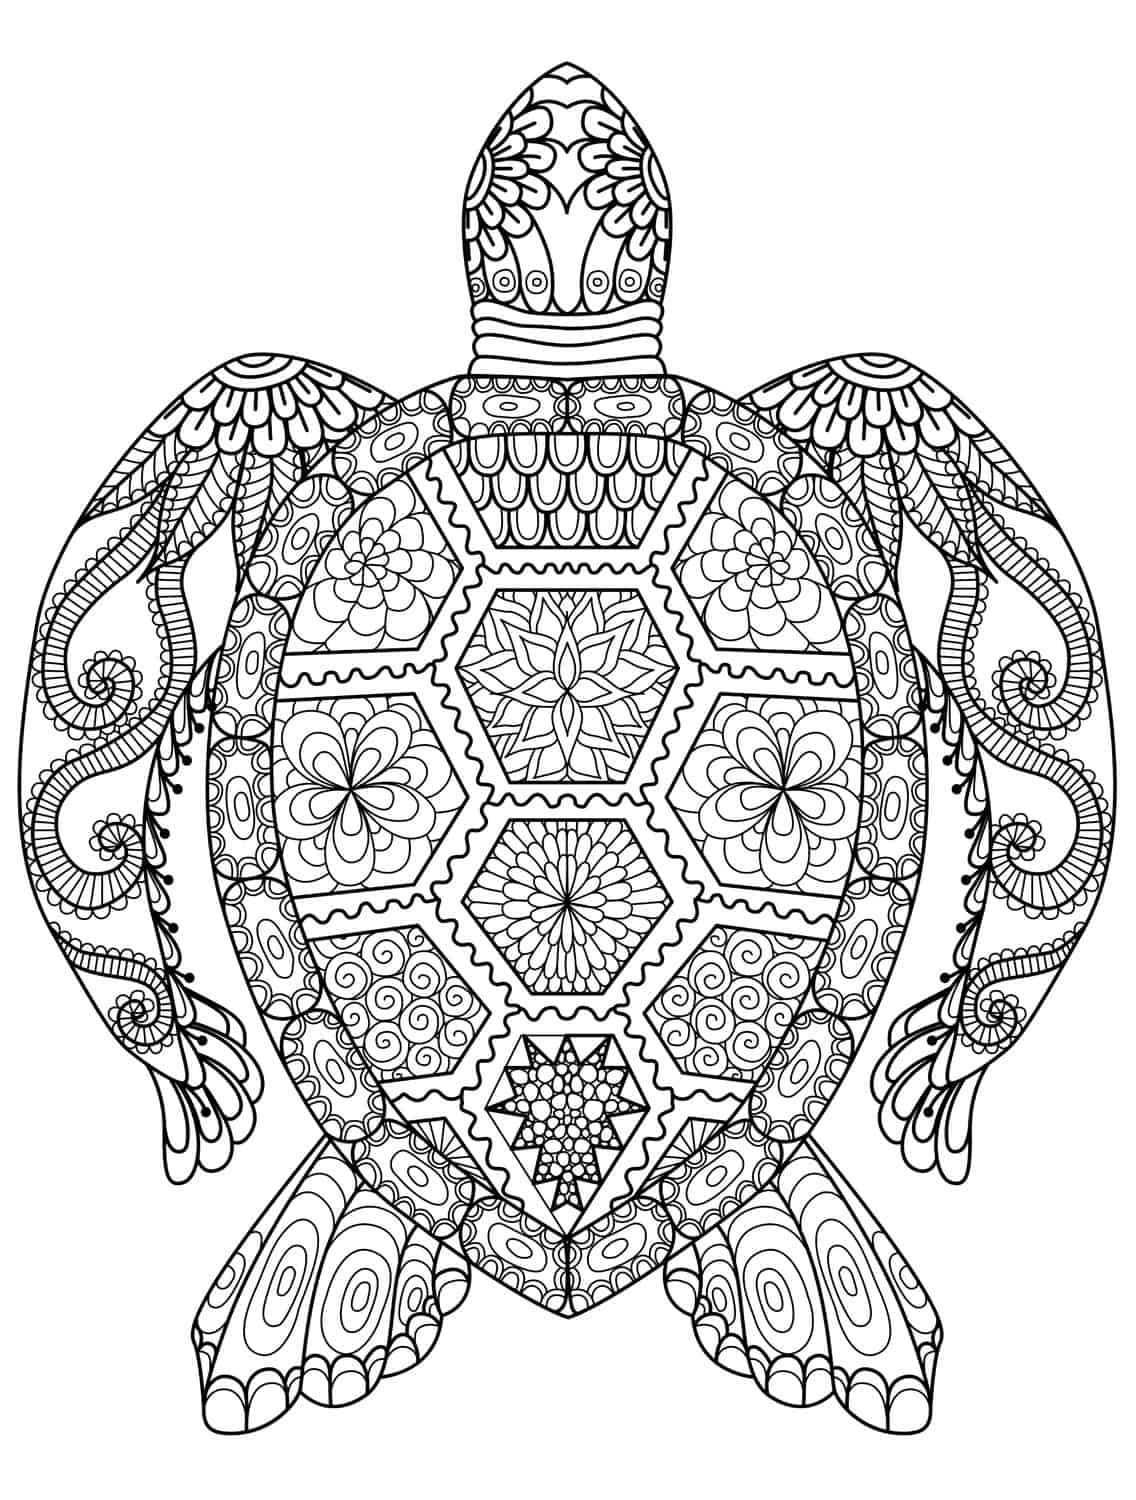 Coloring Sheets For Adults Printable
 20 Gorgeous Free Printable Adult Coloring Pages Page 3